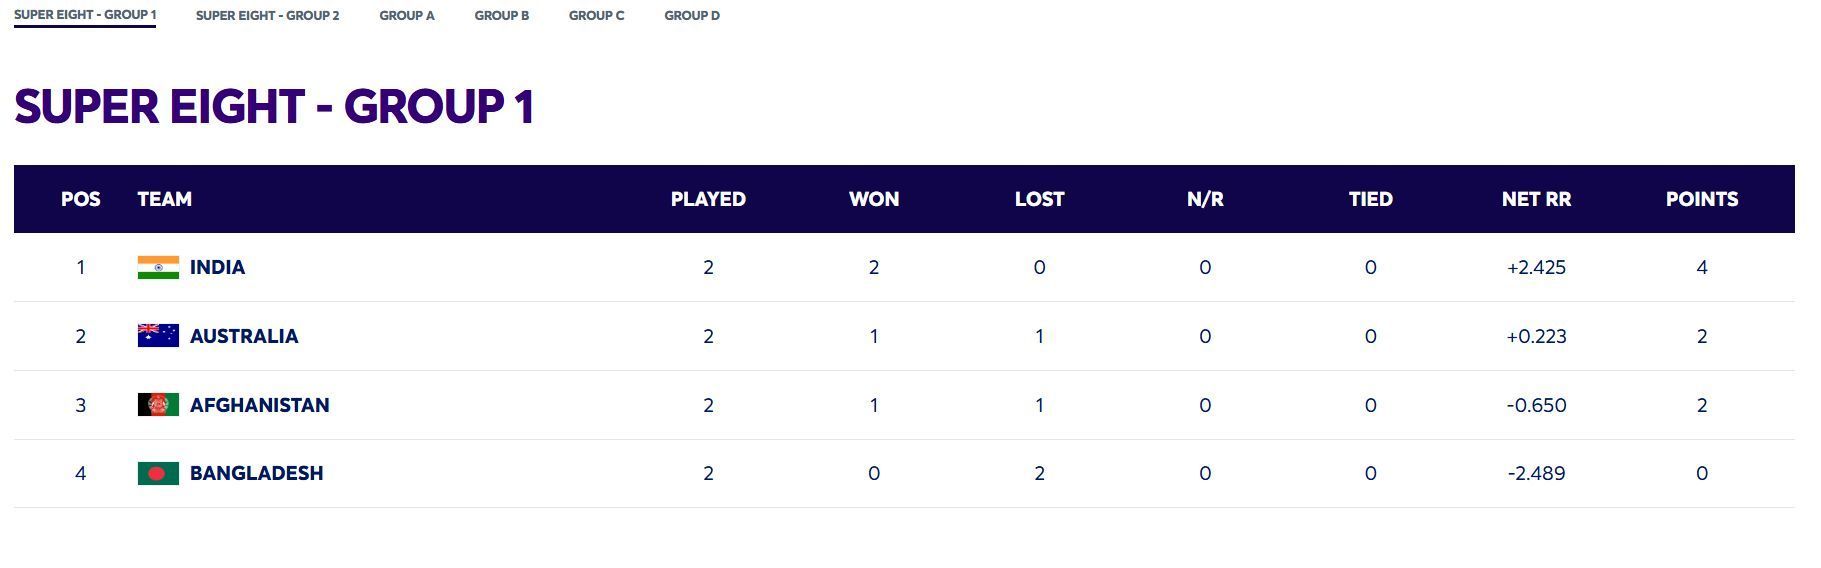 Australia continue to be in the 2nd position (Image: ICC)